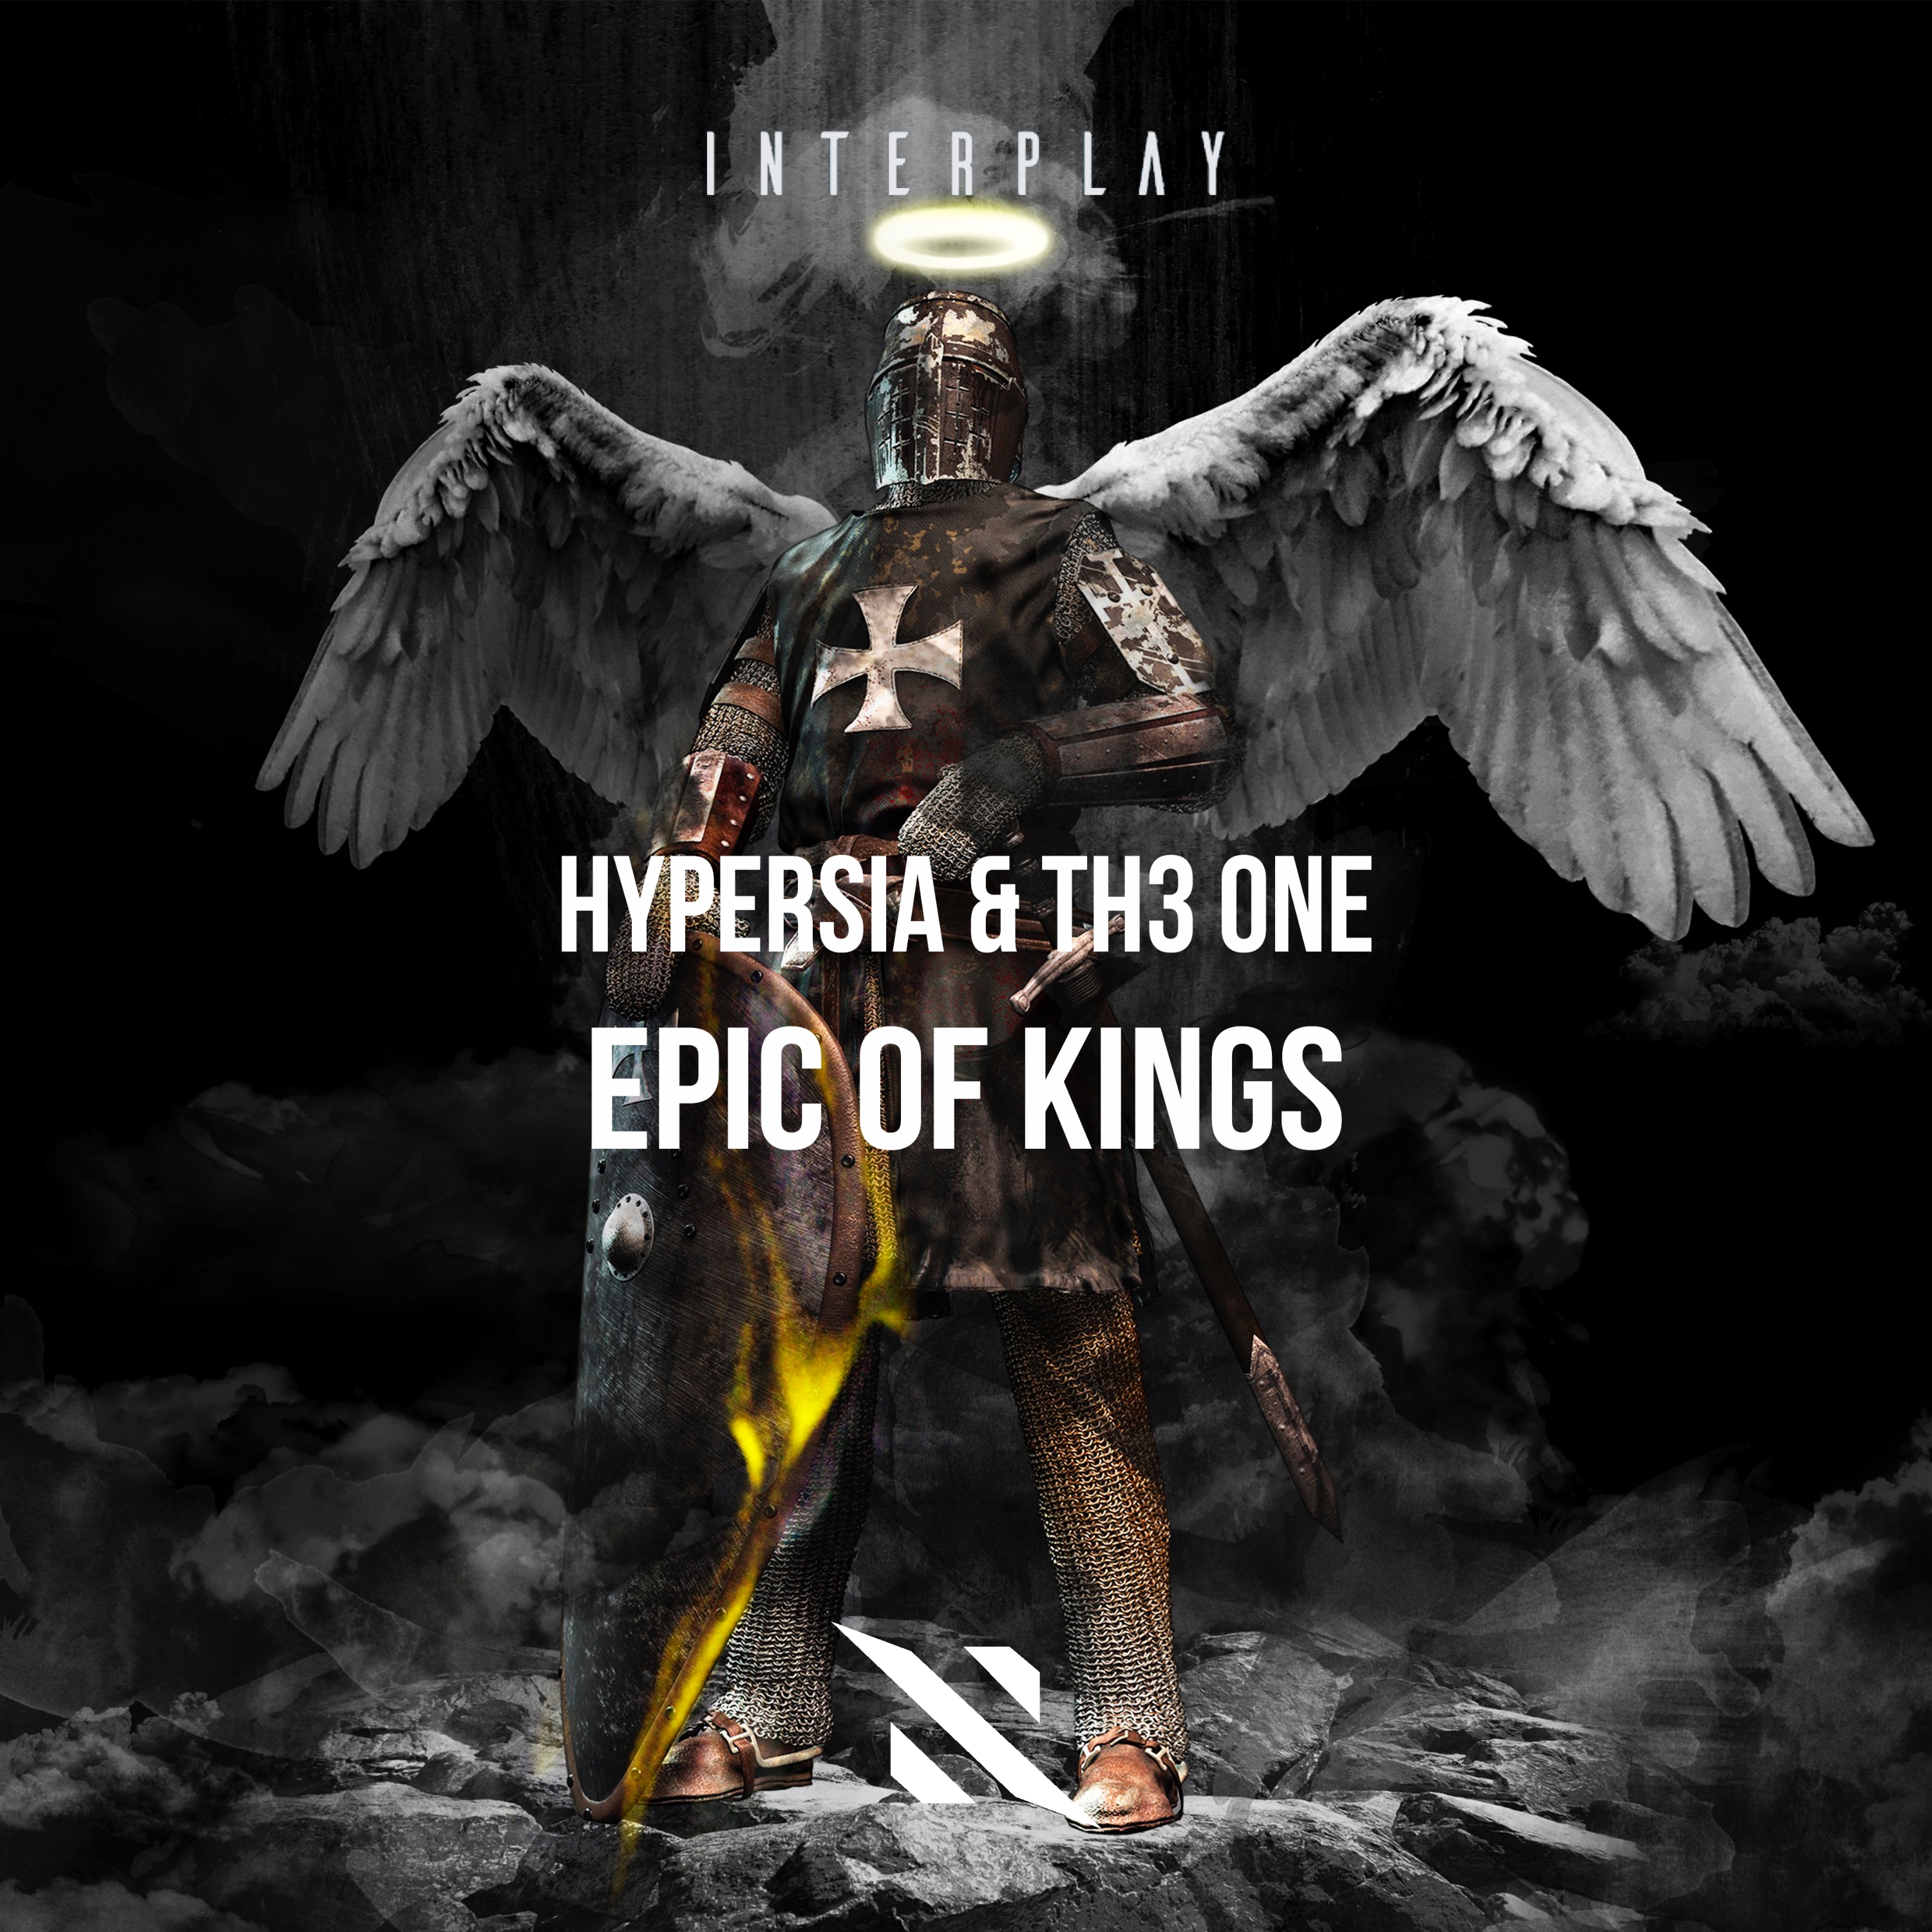 Hypersia &TH3 ONE -Epic of Kings